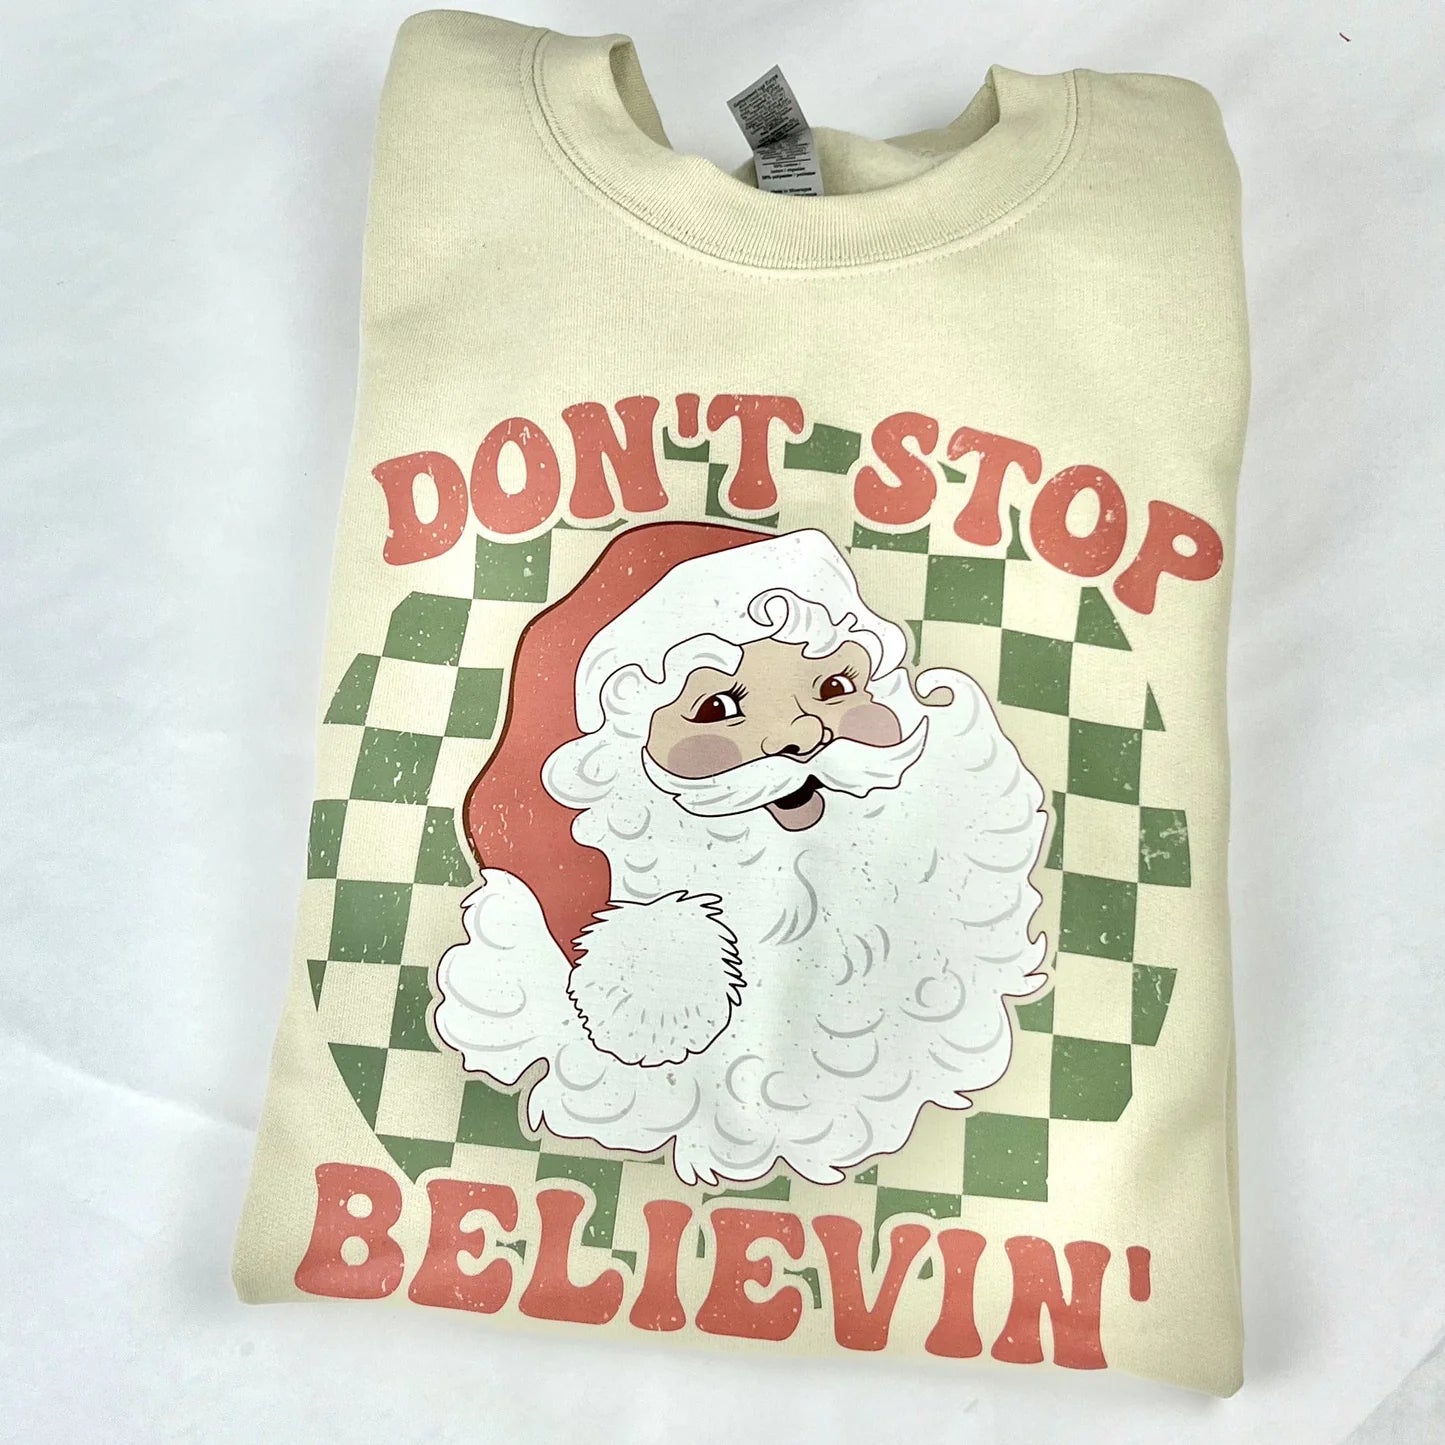 Don't Stop Believin' Christmas Shirt